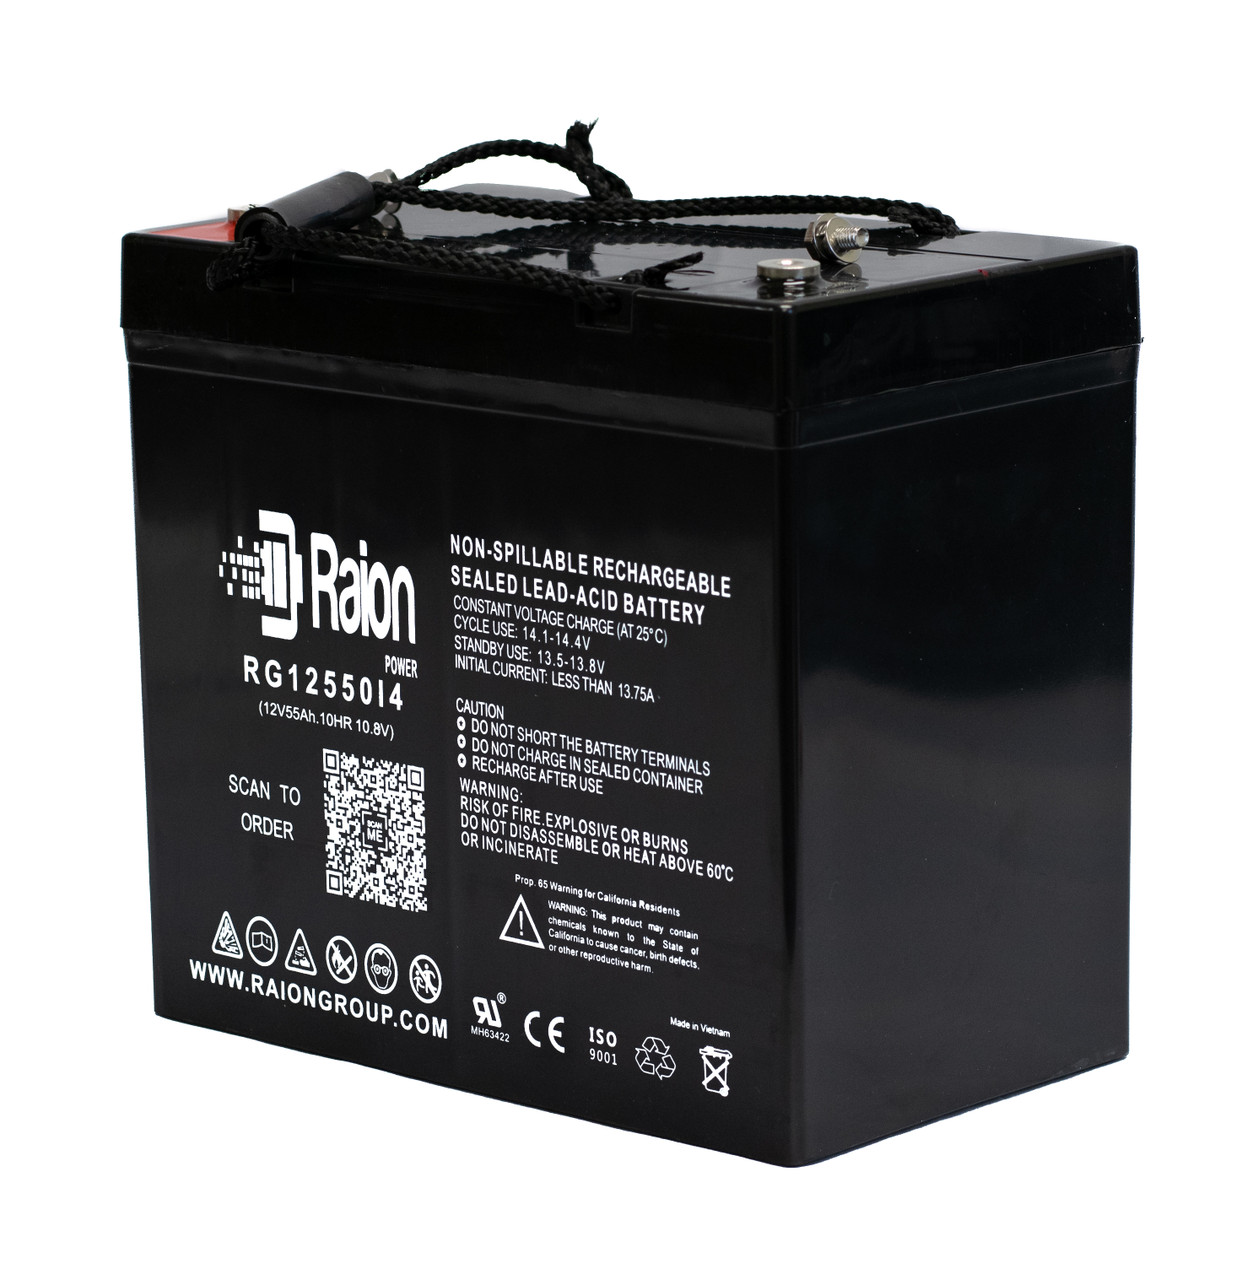 Raion Power Replacement 12V 55Ah Battery for Bosfa GB12-55 - 1 Pack